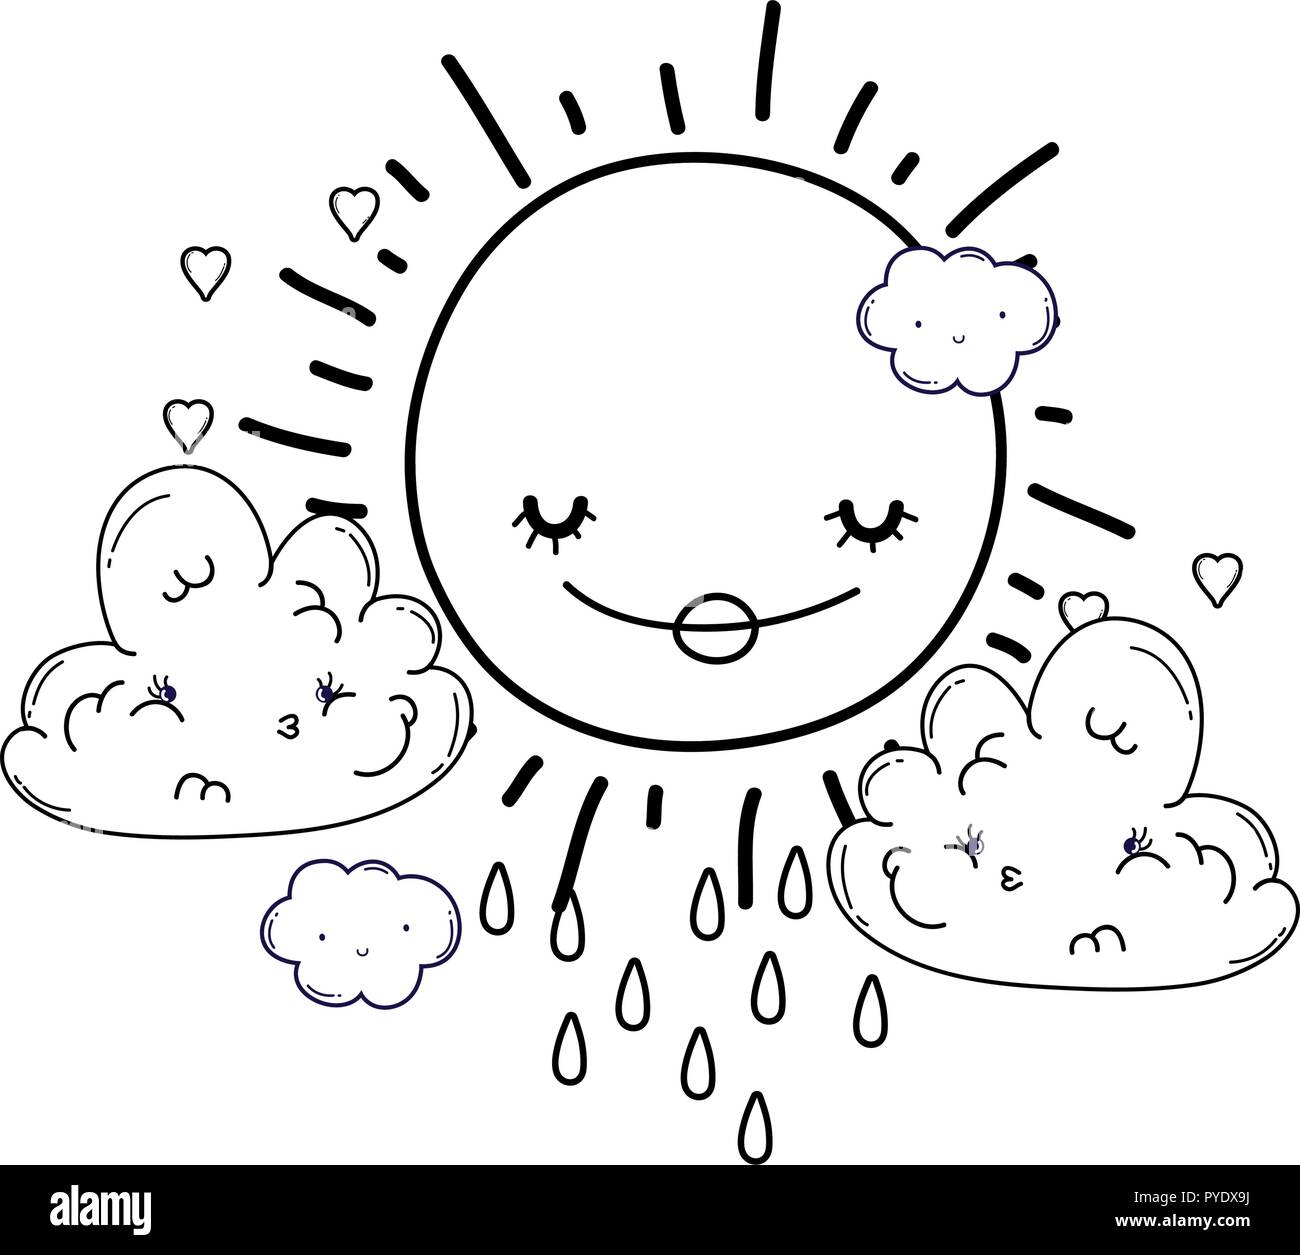 Sun and clouds cartoons in black and white Stock Vector